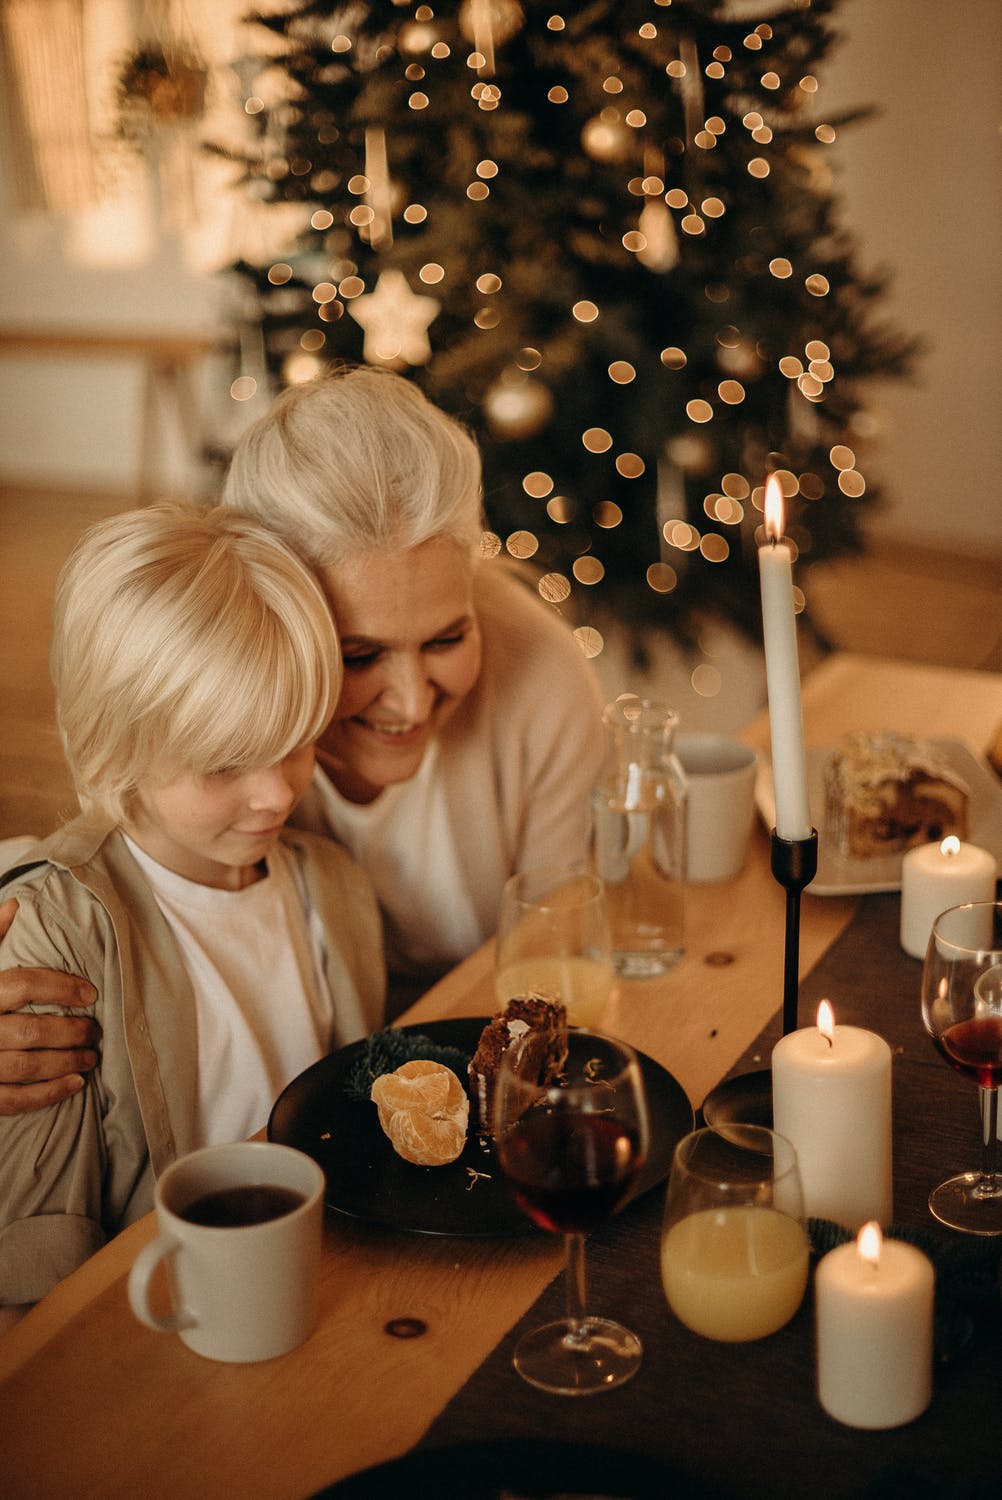 Dorothy, Diana and Eddie spent the most wonderful Christmas together | Source: Pexels